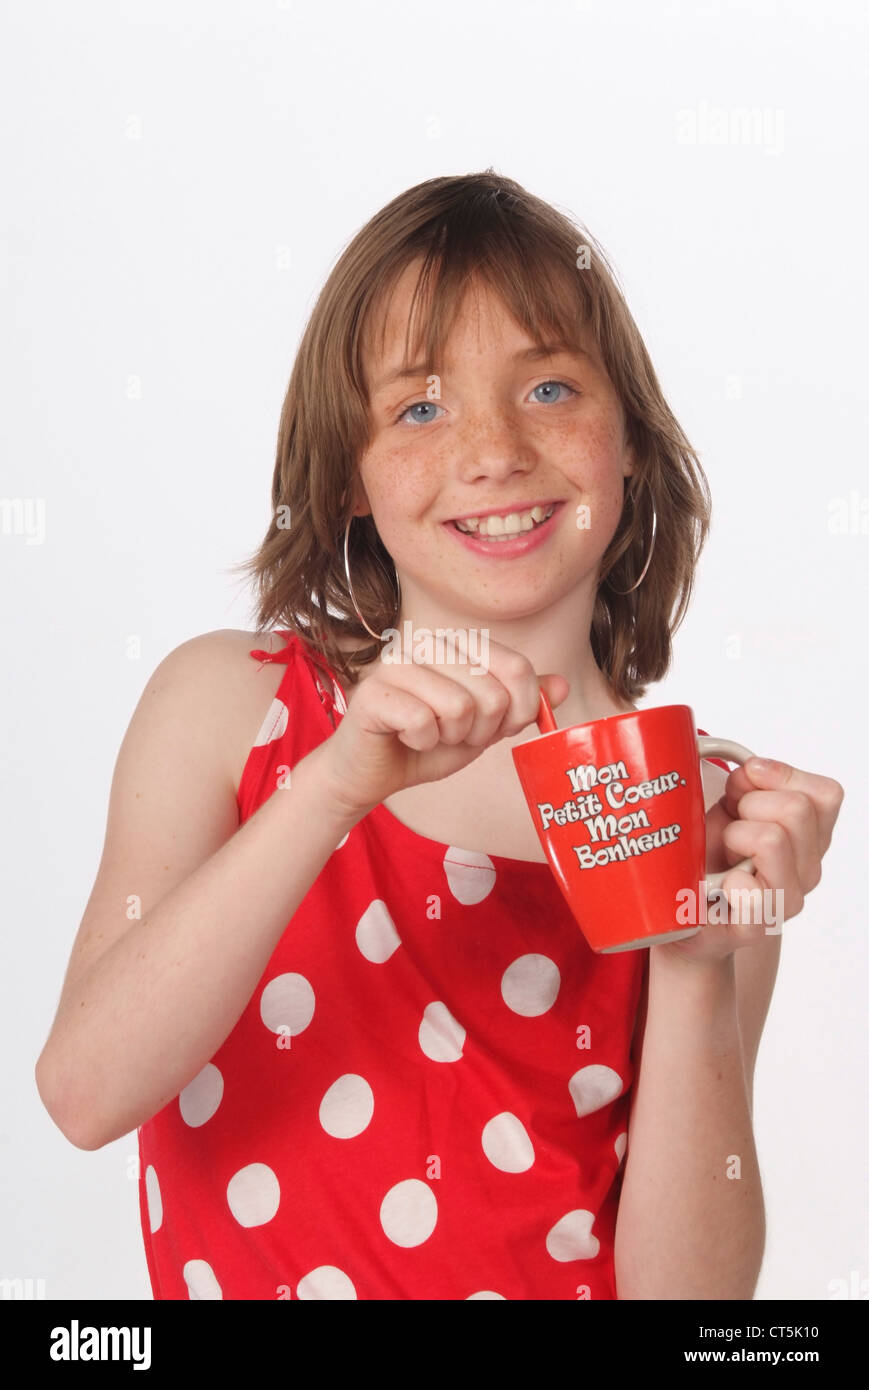 ADOLESCENT WITH HOT DRINK Stock Photo